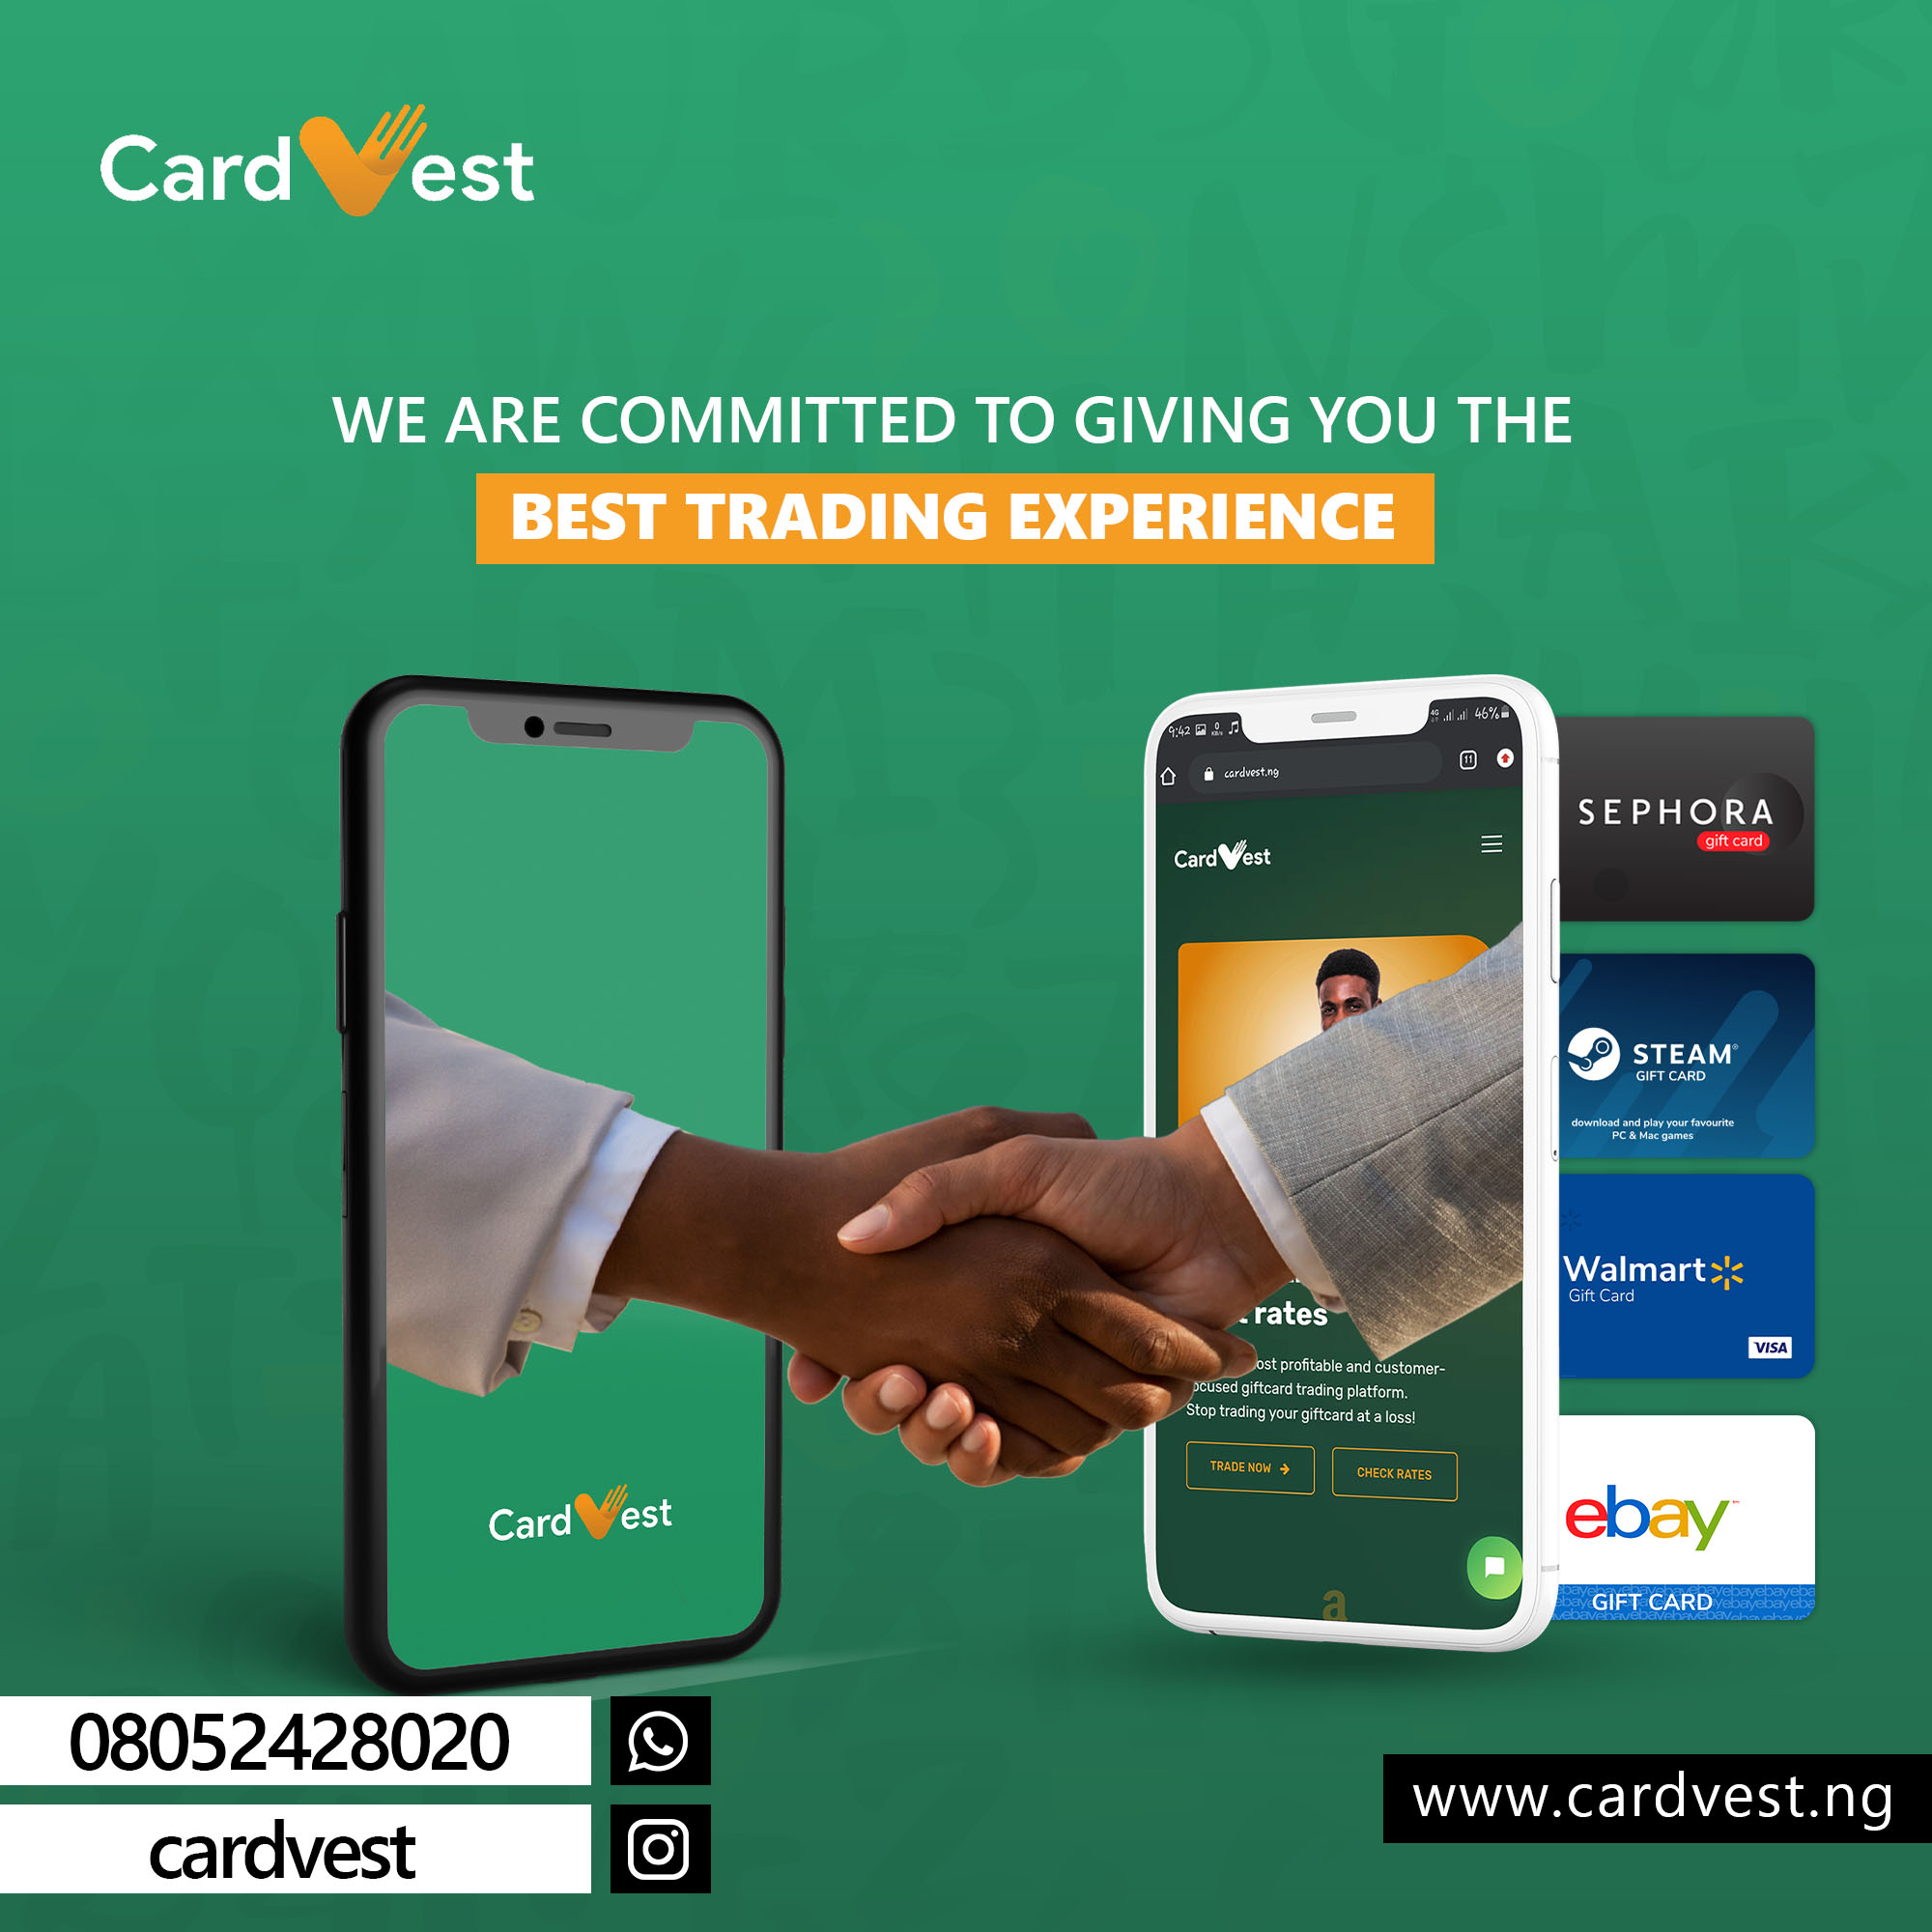 Redeem Gift Cards for Cash in Few Minutes- Sell Gift Cards in Nigeria